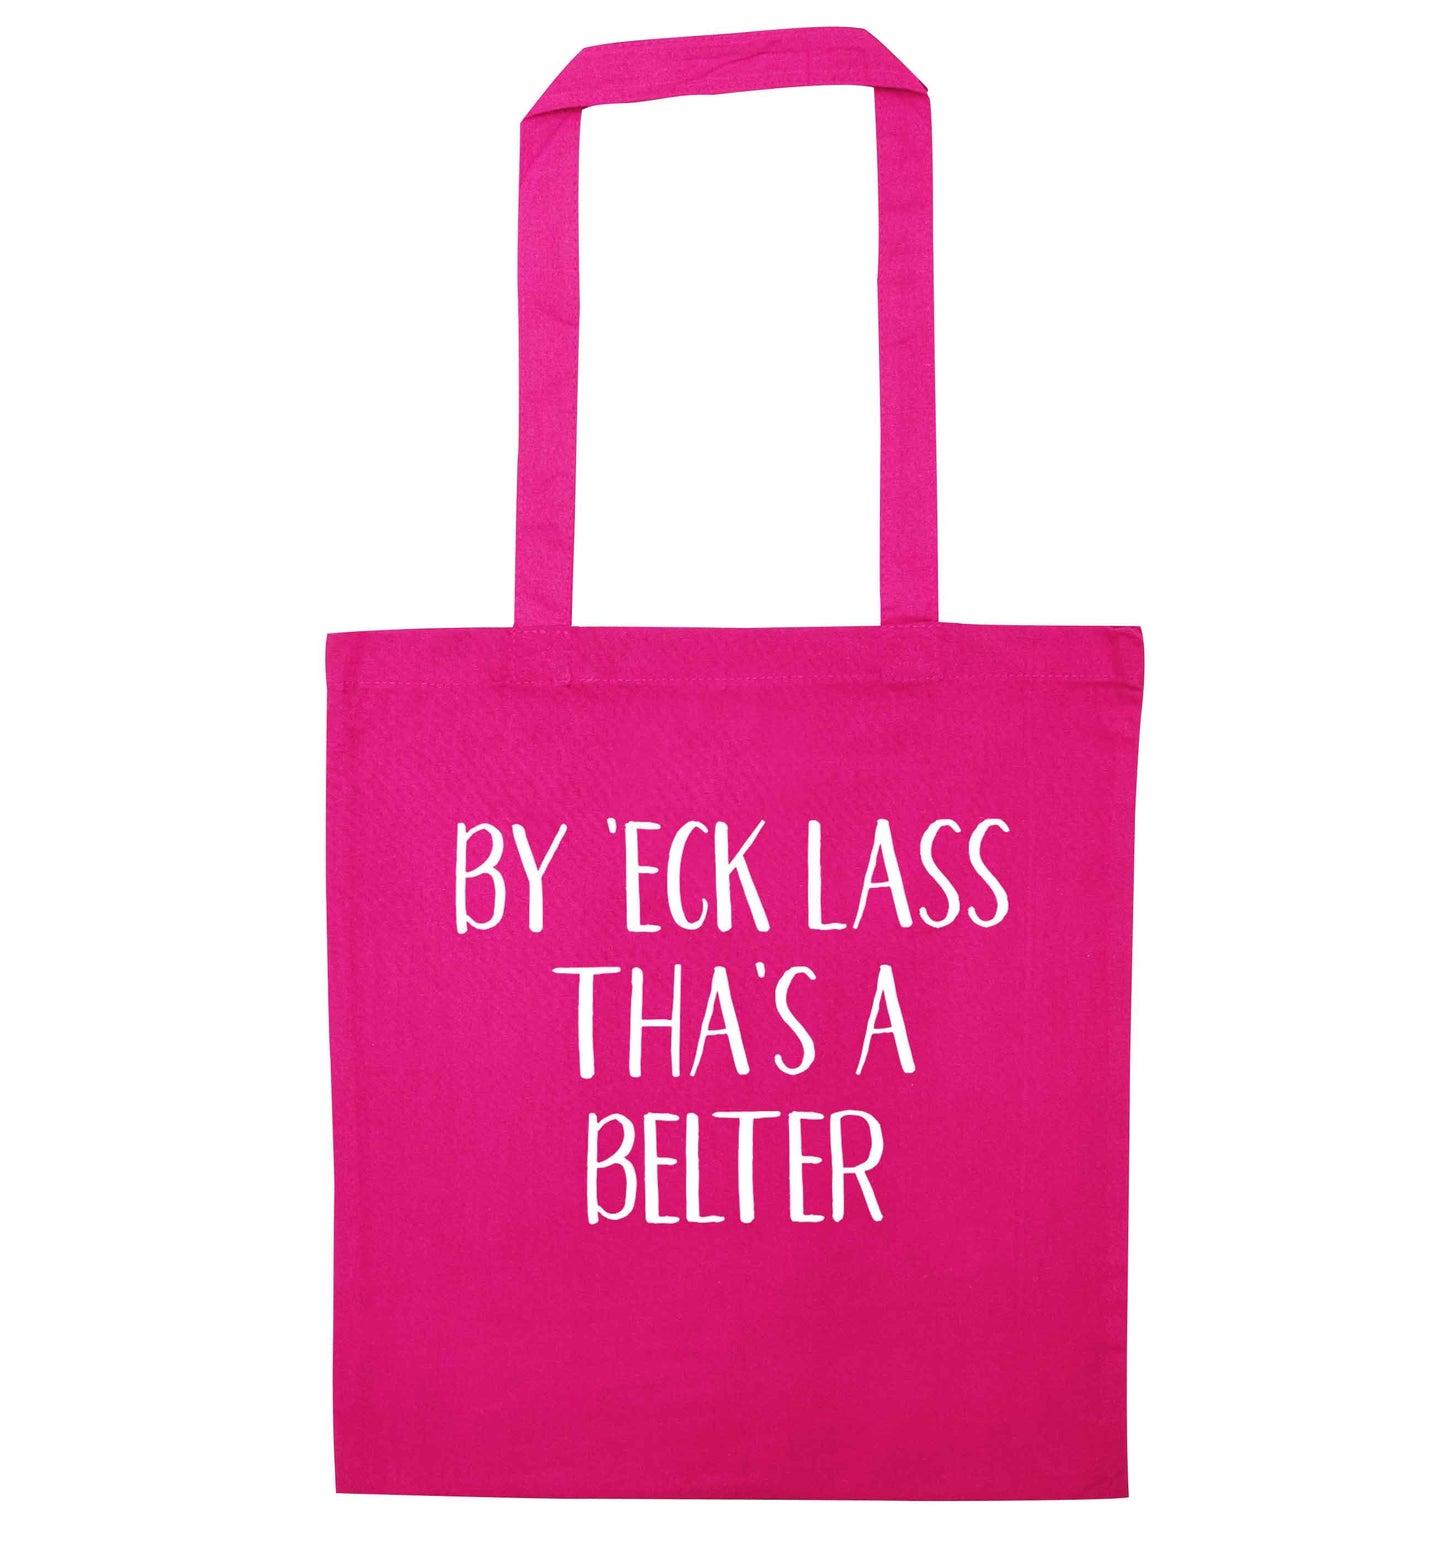 Be 'eck lass tha's a belter pink tote bag